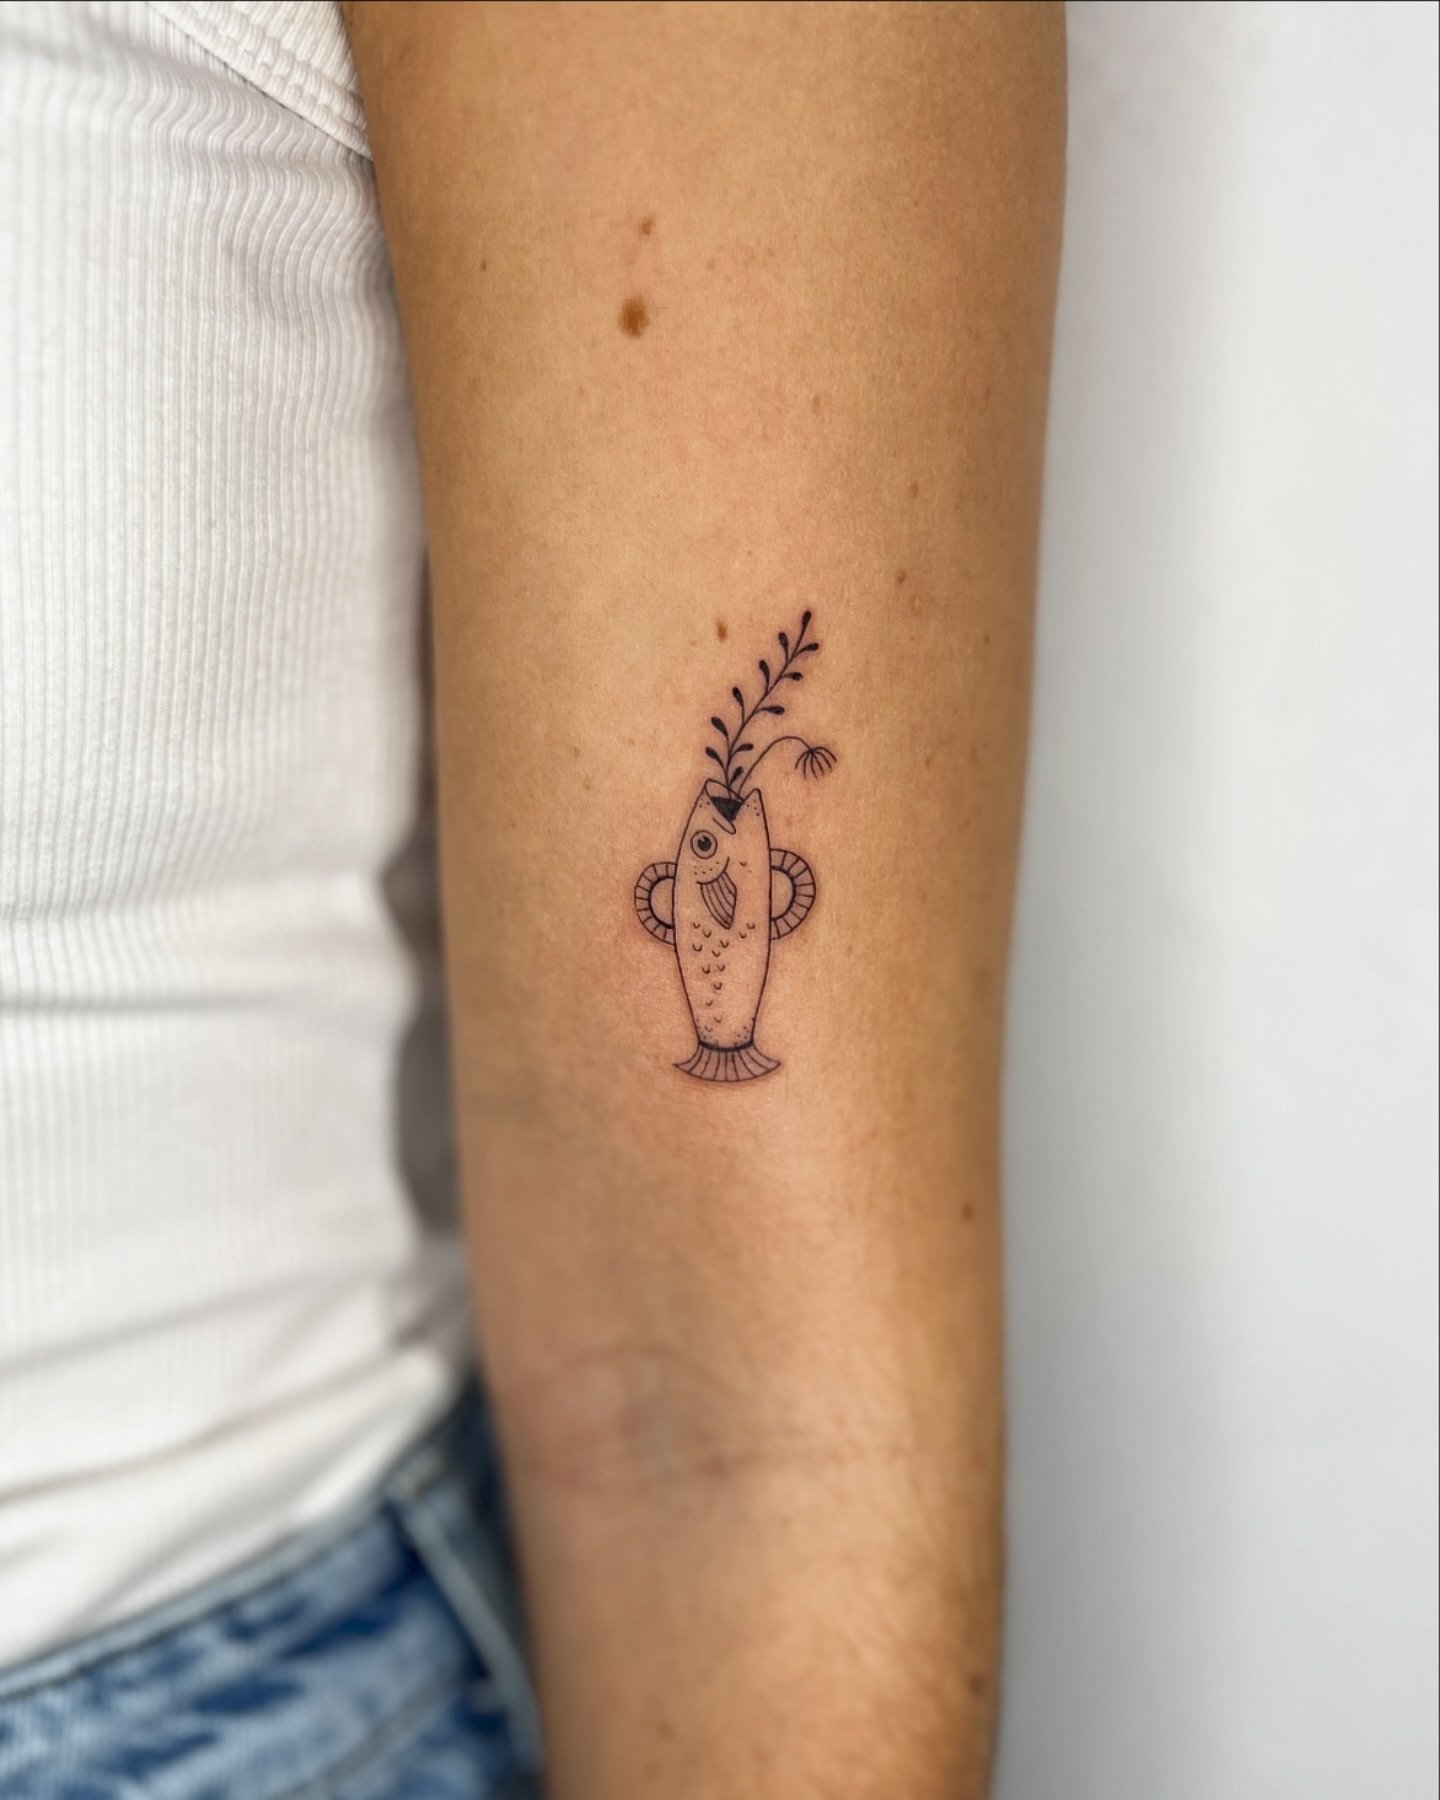 One of my favourite from yesterdays #walkin @heydu.store 🐟🏺💞 thanks for choosing this one!

Psssst: You really liked the walkin-flash, but didn&rsquo;t manage to come? #staytuned for some booking-updates really soon! 😎

#frauinestattoo #fishvase 